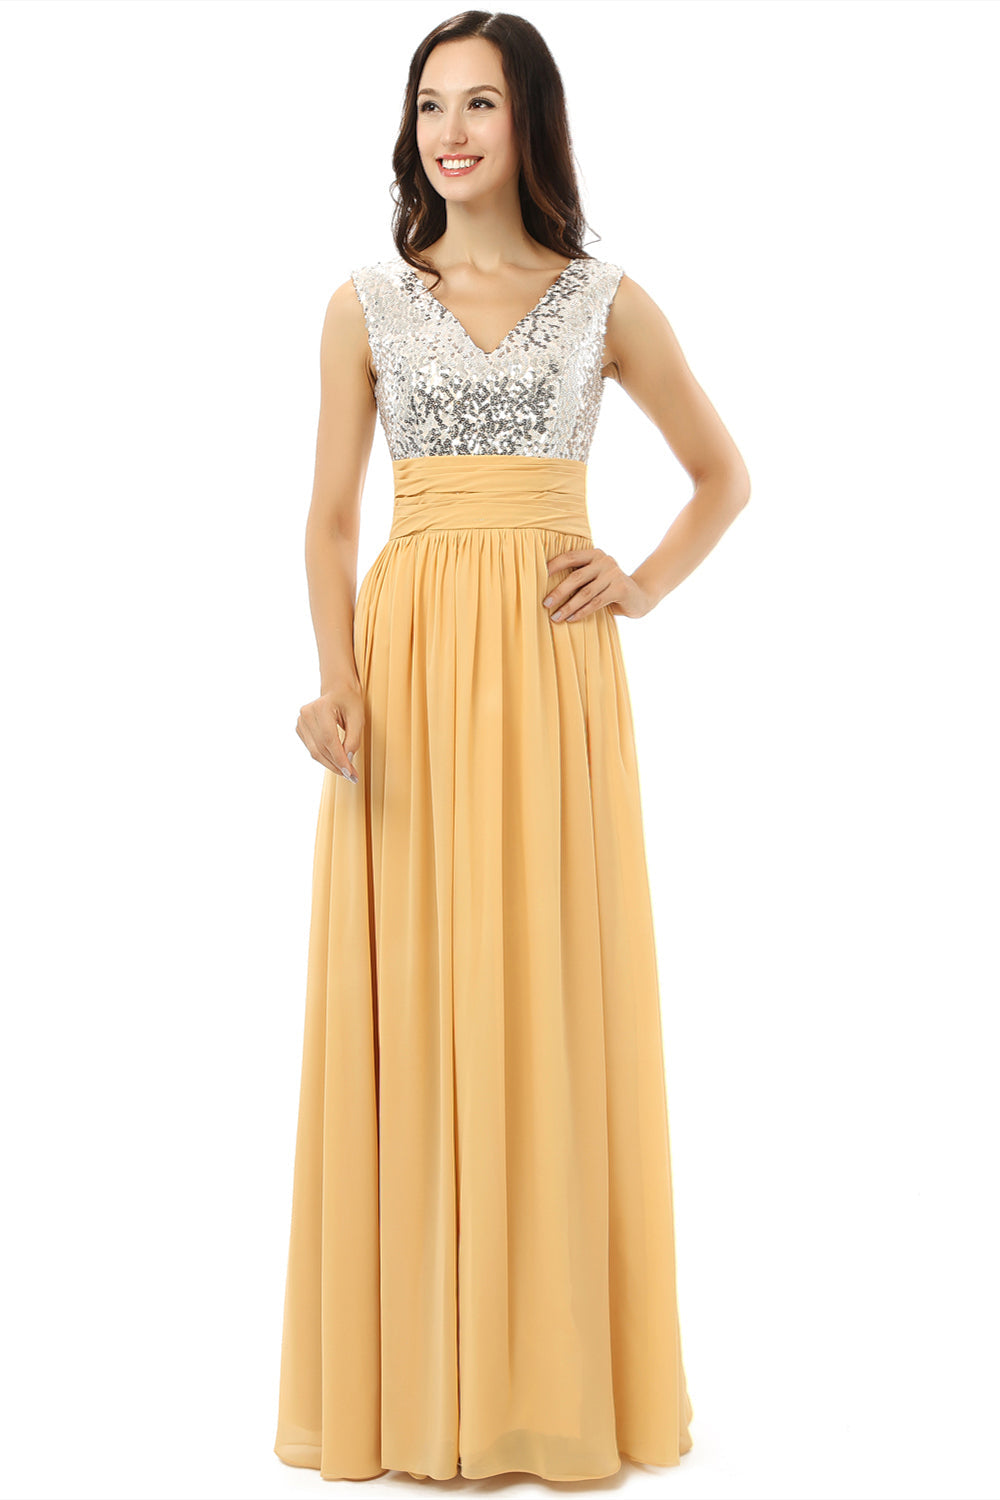 Evening Dresses, Yellow Chiffon Silver Sequins V-neck Backless Bridesmaid Dresses